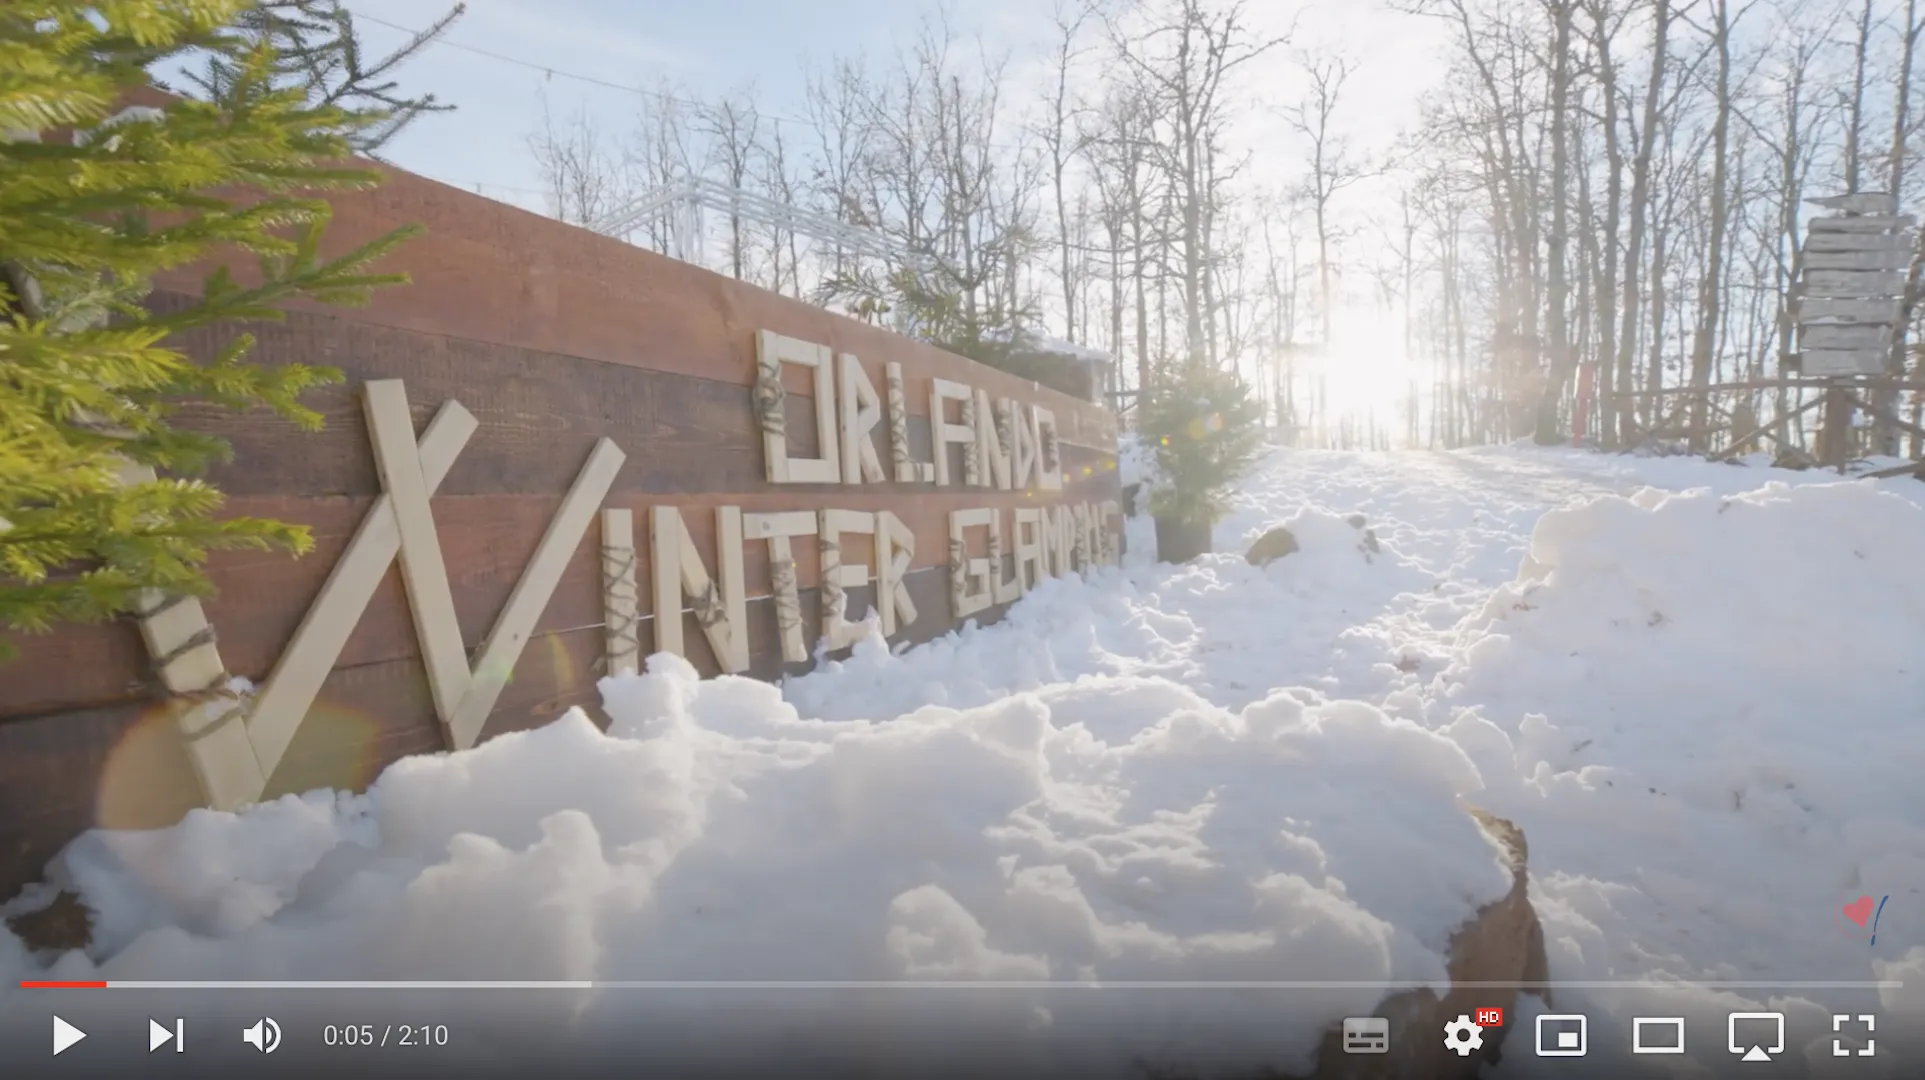 Orlando Winter Glamping | Official video